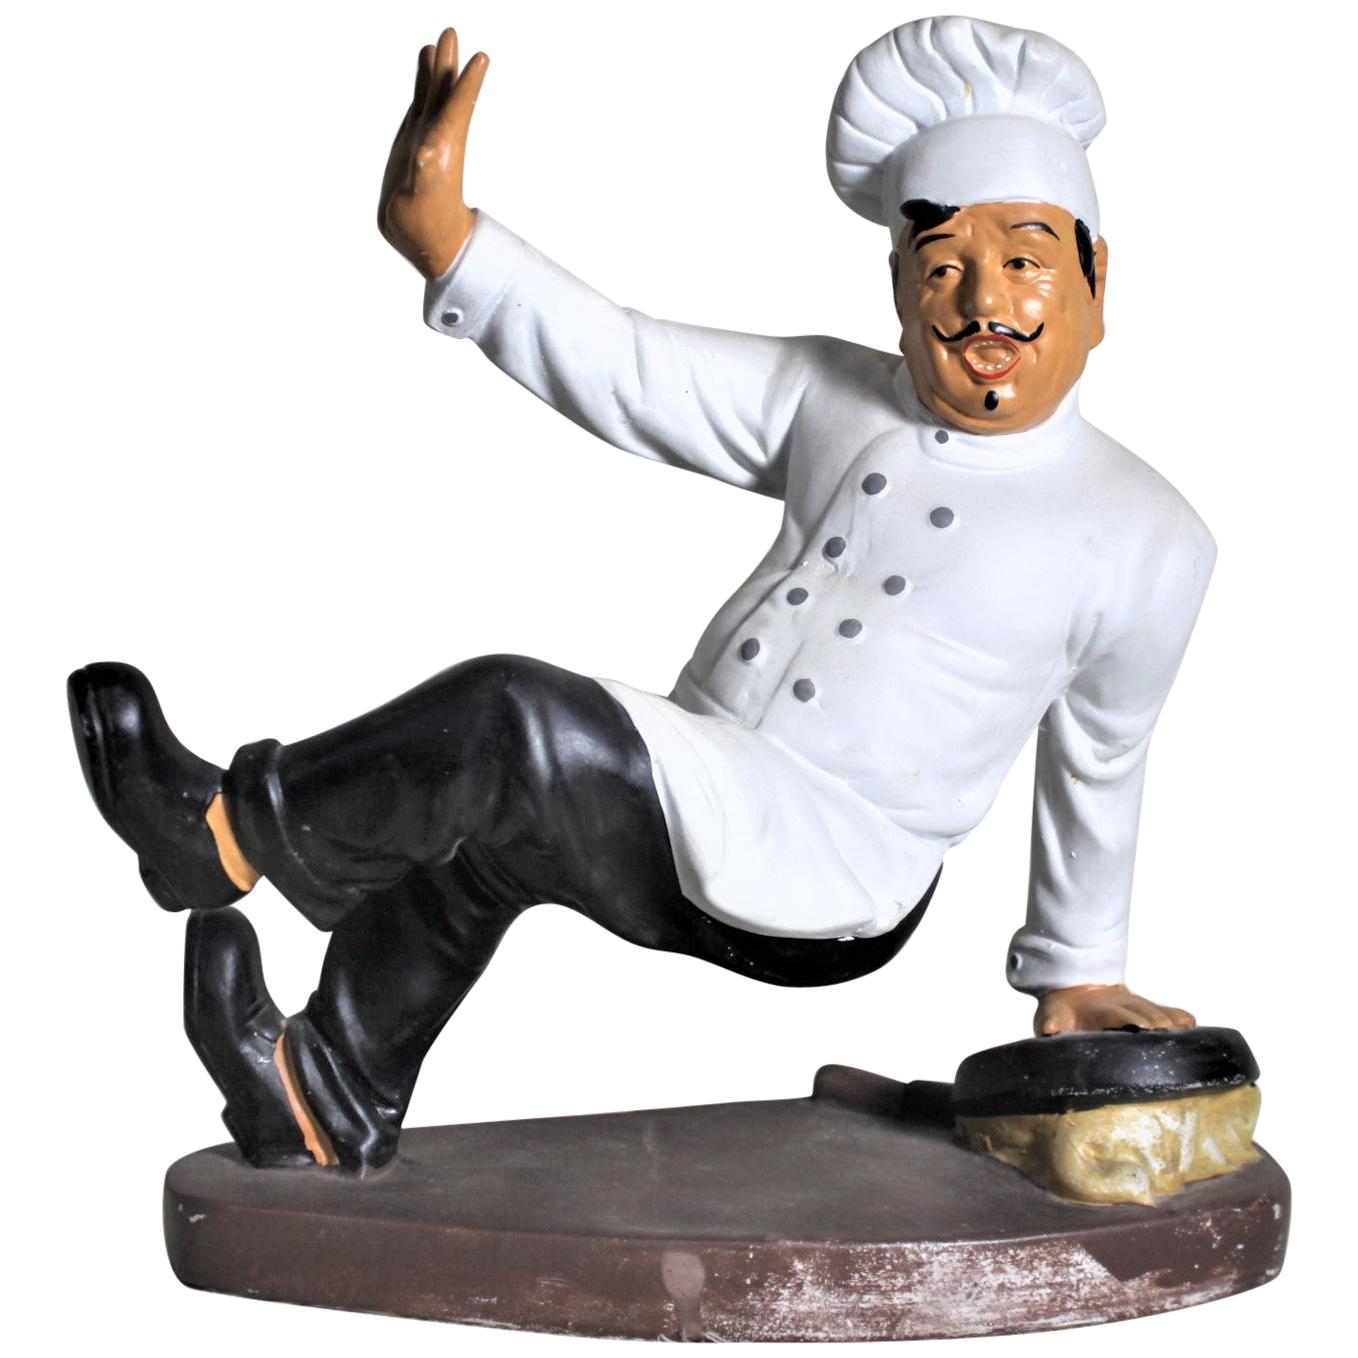 Vintage Whimsical Chalkware French or Italian Falling Chef Figurine or Sculpture